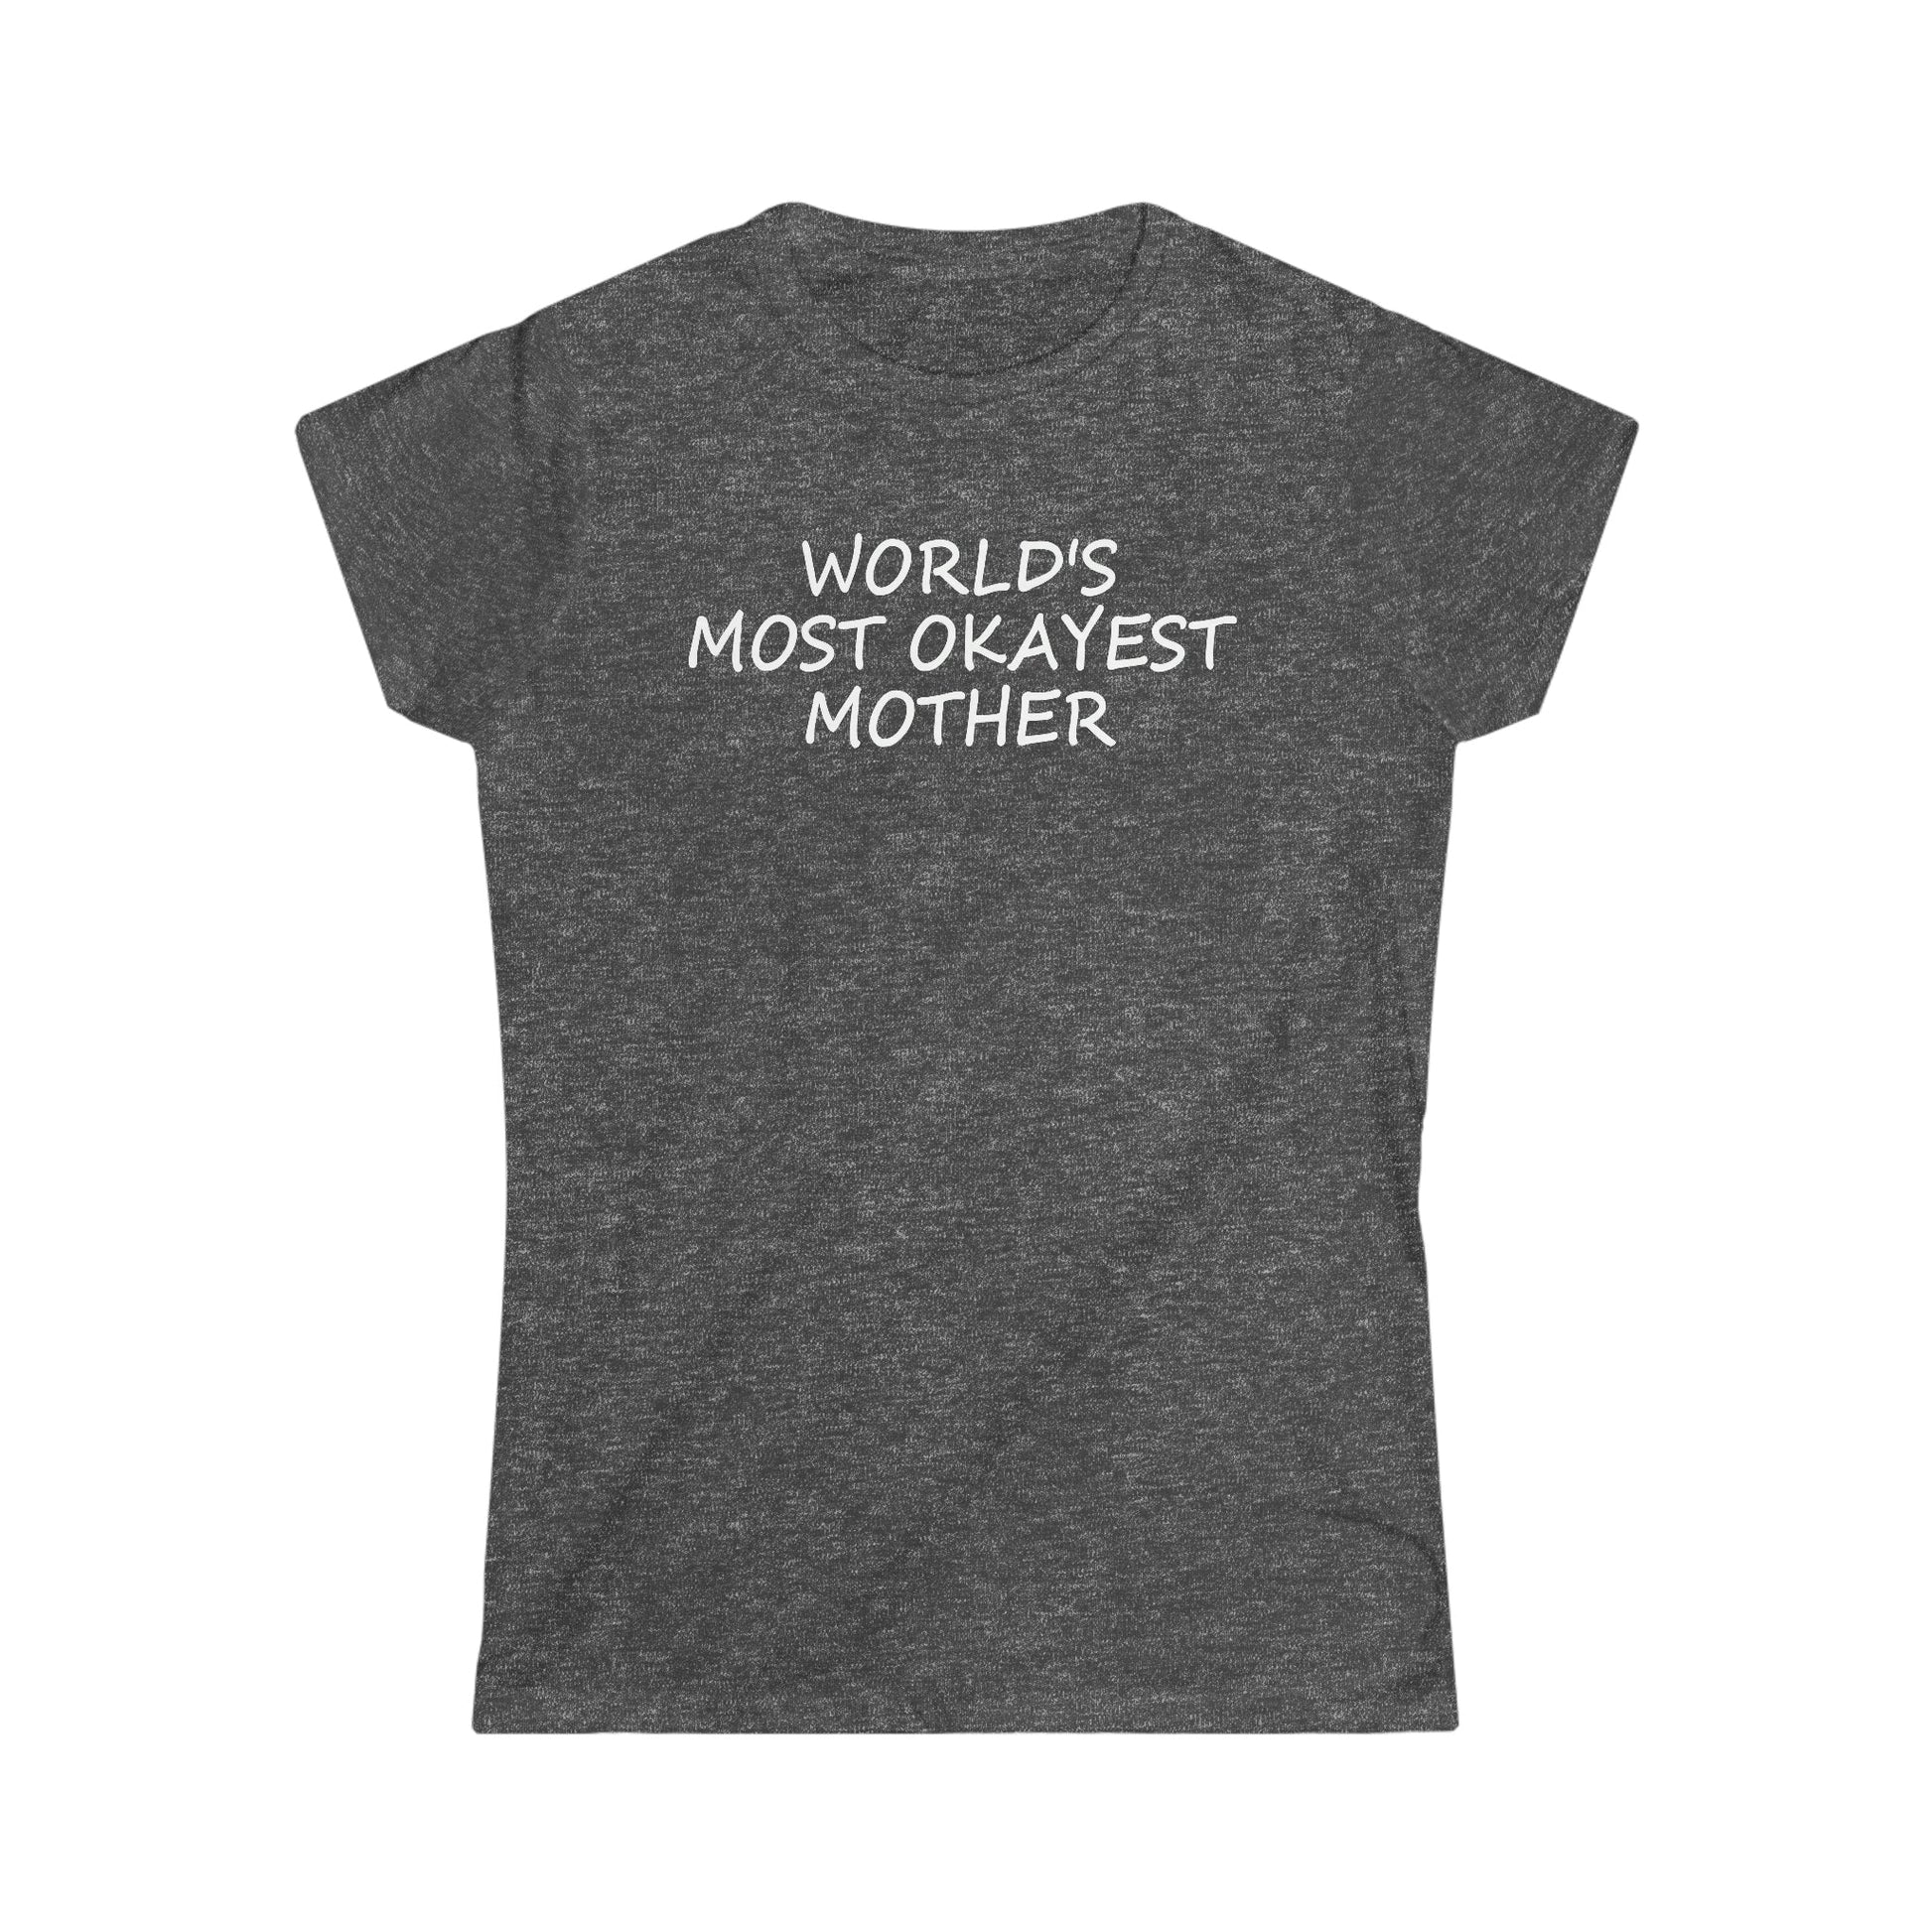 CrazyYetiClothing, CYC, World's Most Okayest Mother - Women's Softstyle Tee, T-Shirt